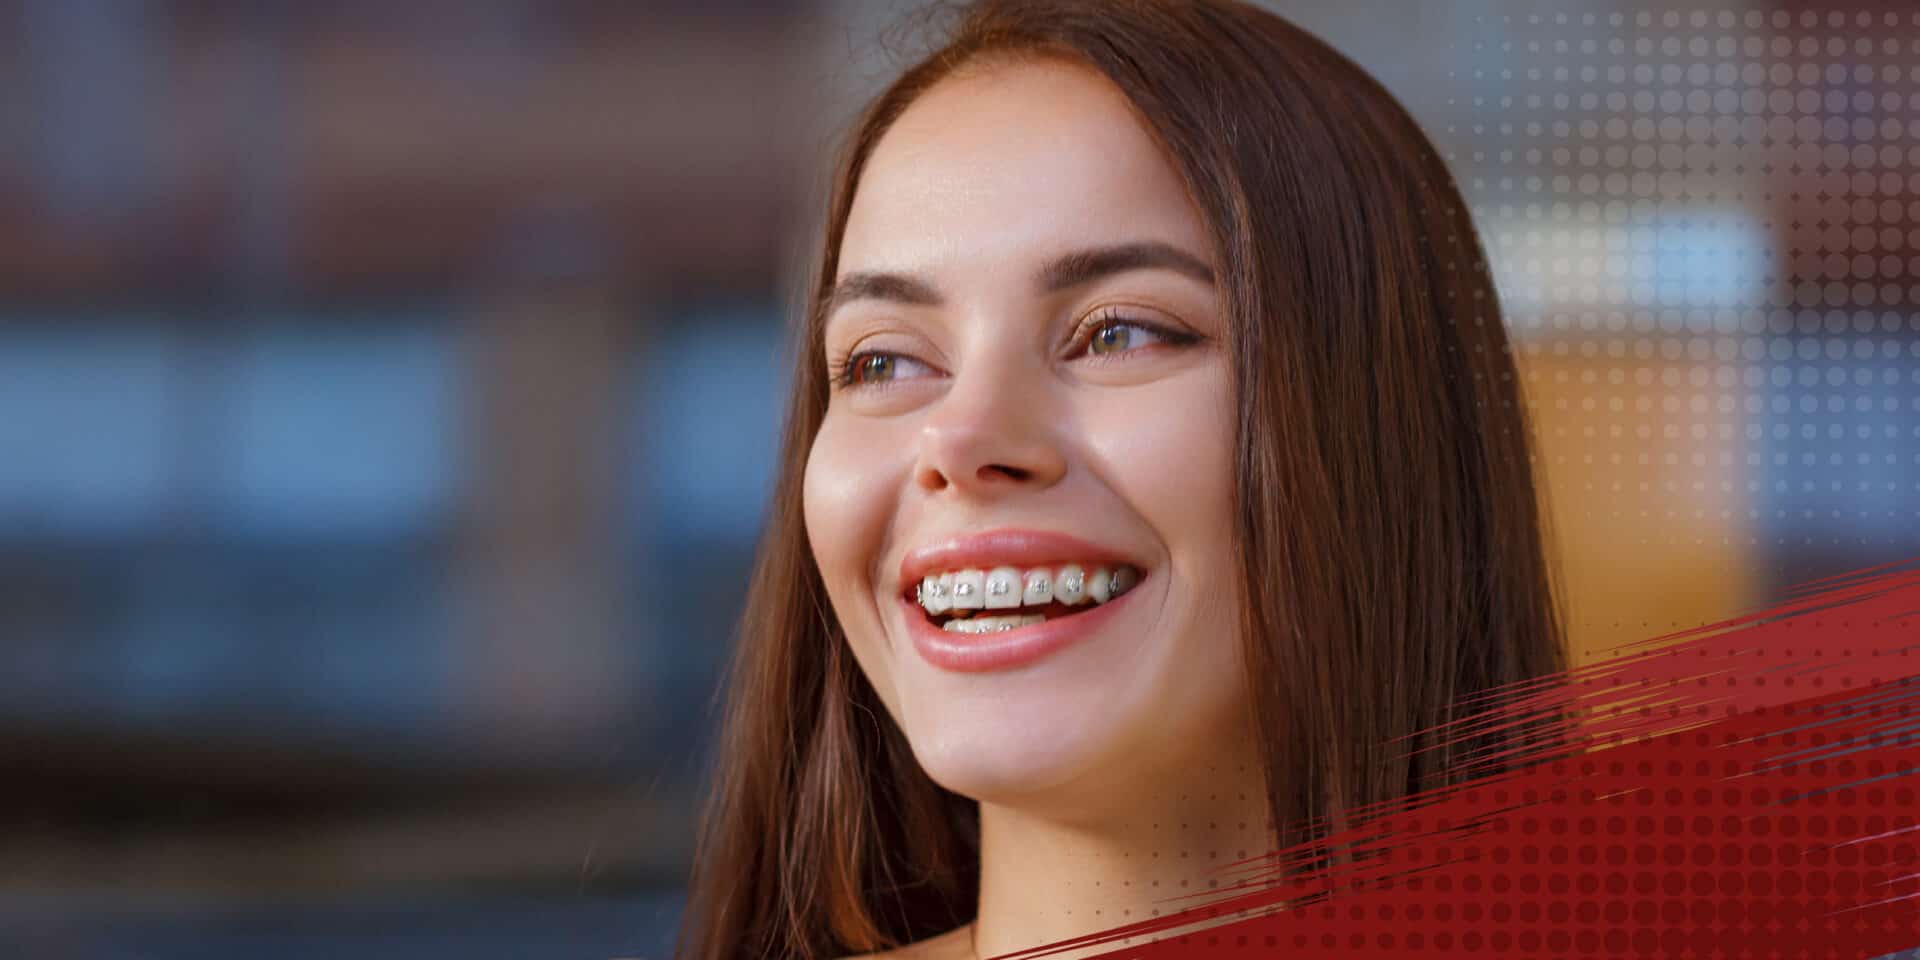 Smiling teen with braces